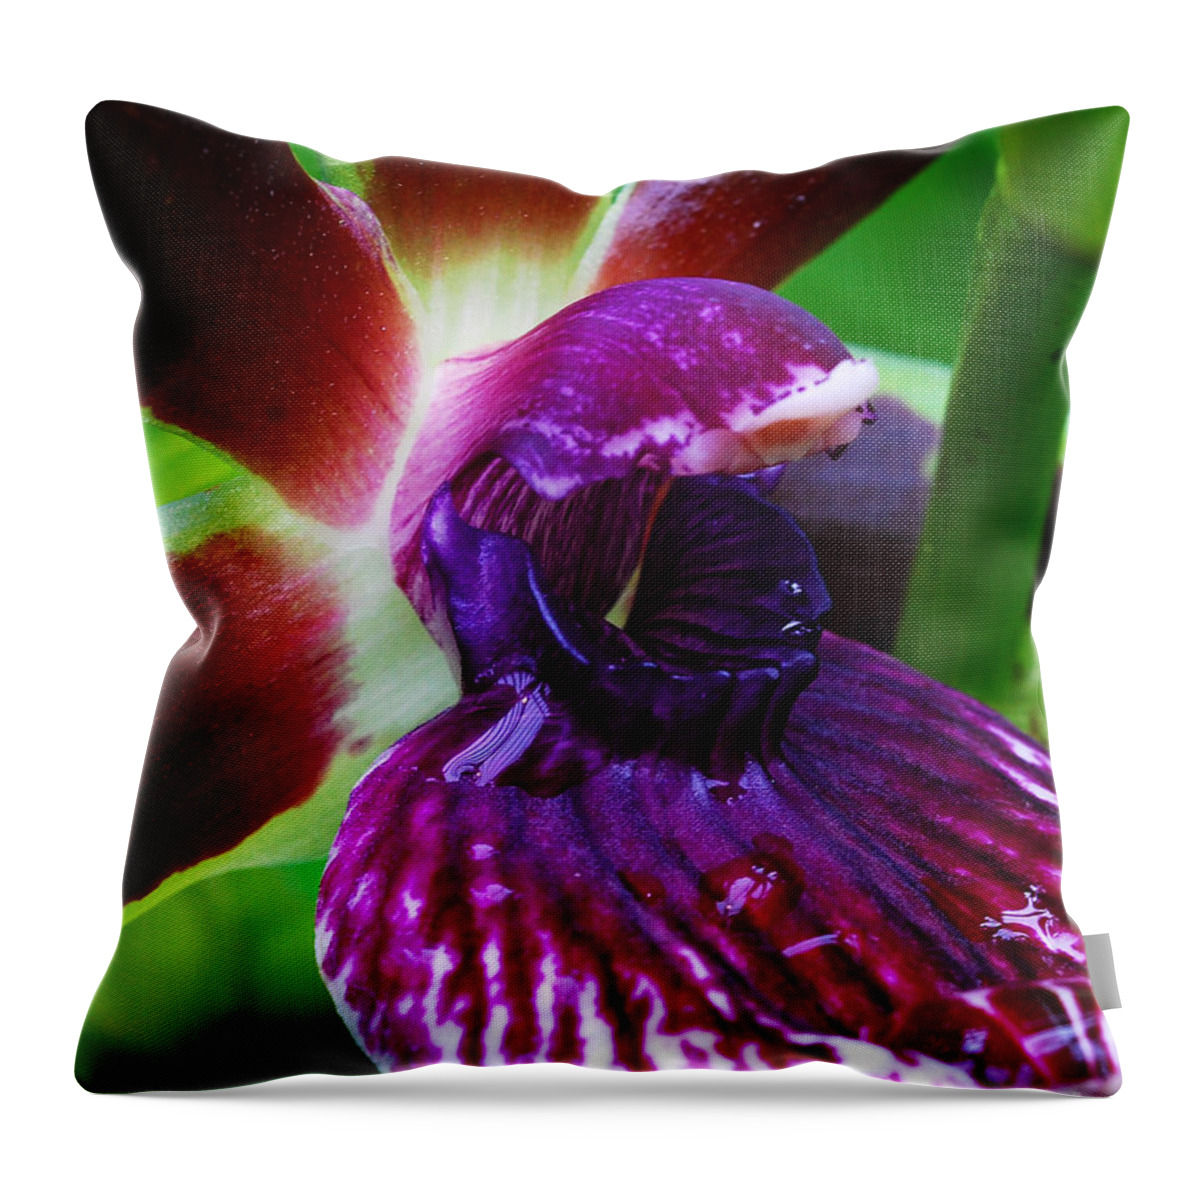 Orchid Throw Pillow featuring the photograph Zygolum Orchid Detail by Nancy Mueller